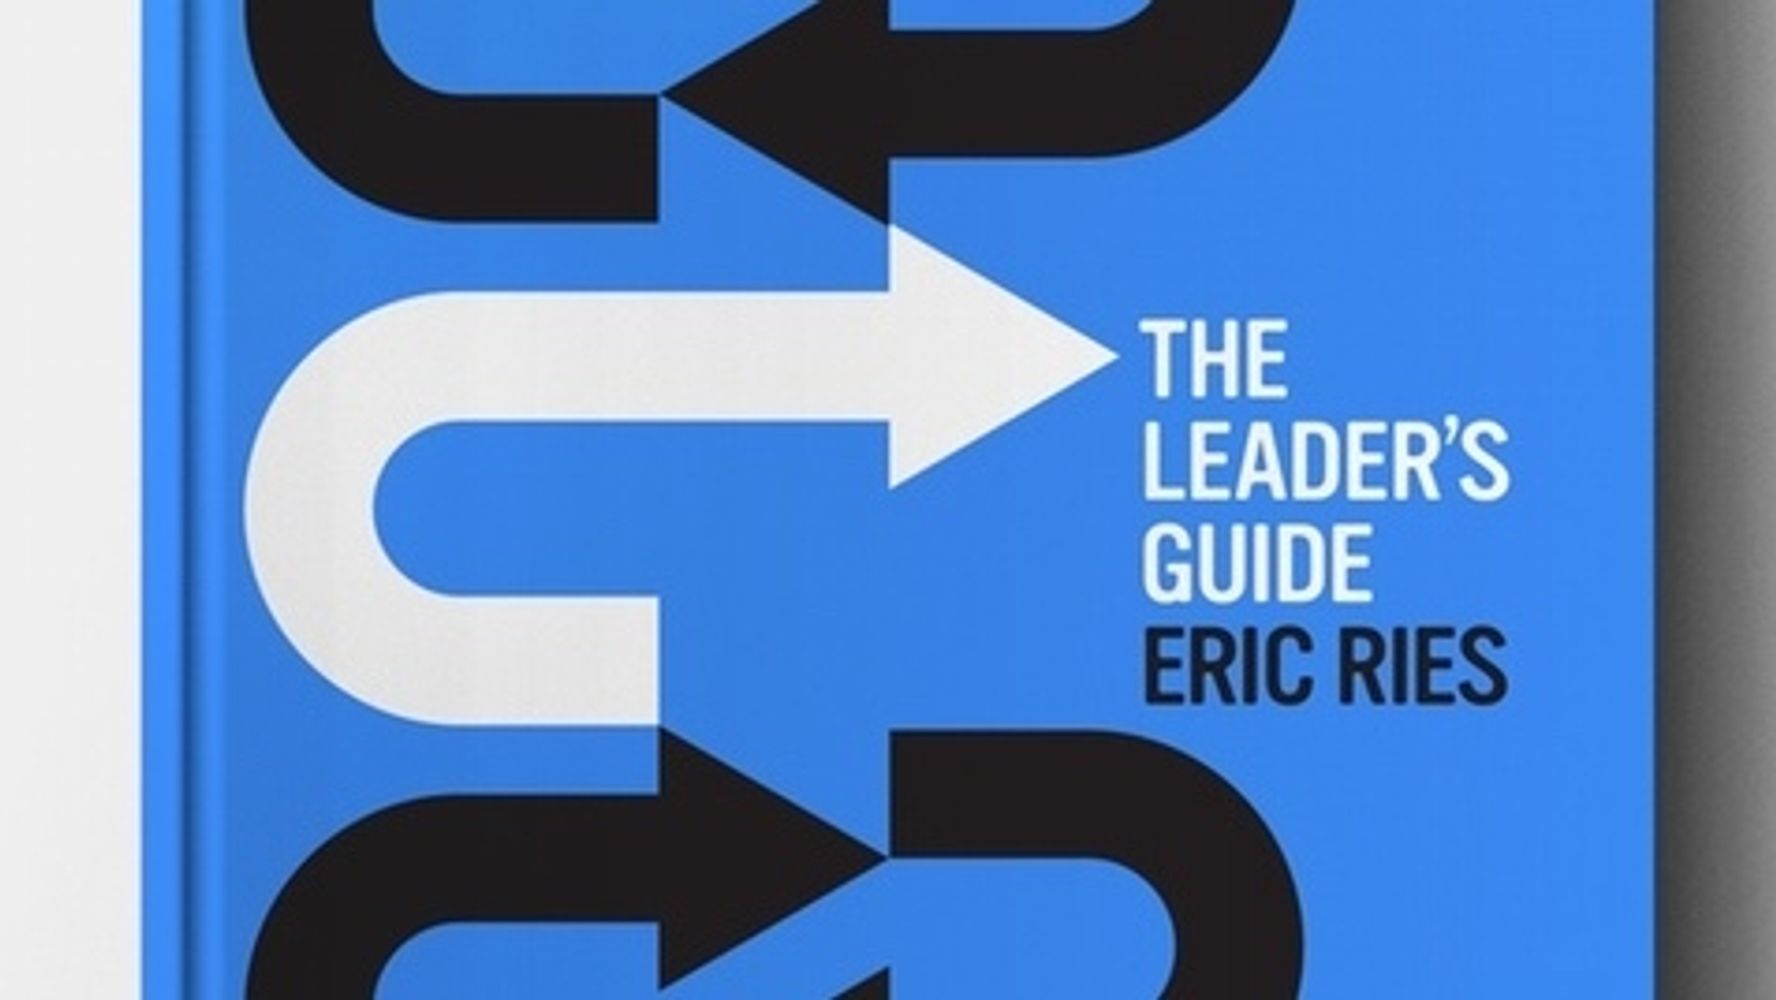 A Review of “The Leader's Guide” by Eric Ries and Some Thoughts on Entrepreneurial Management HuffPost null